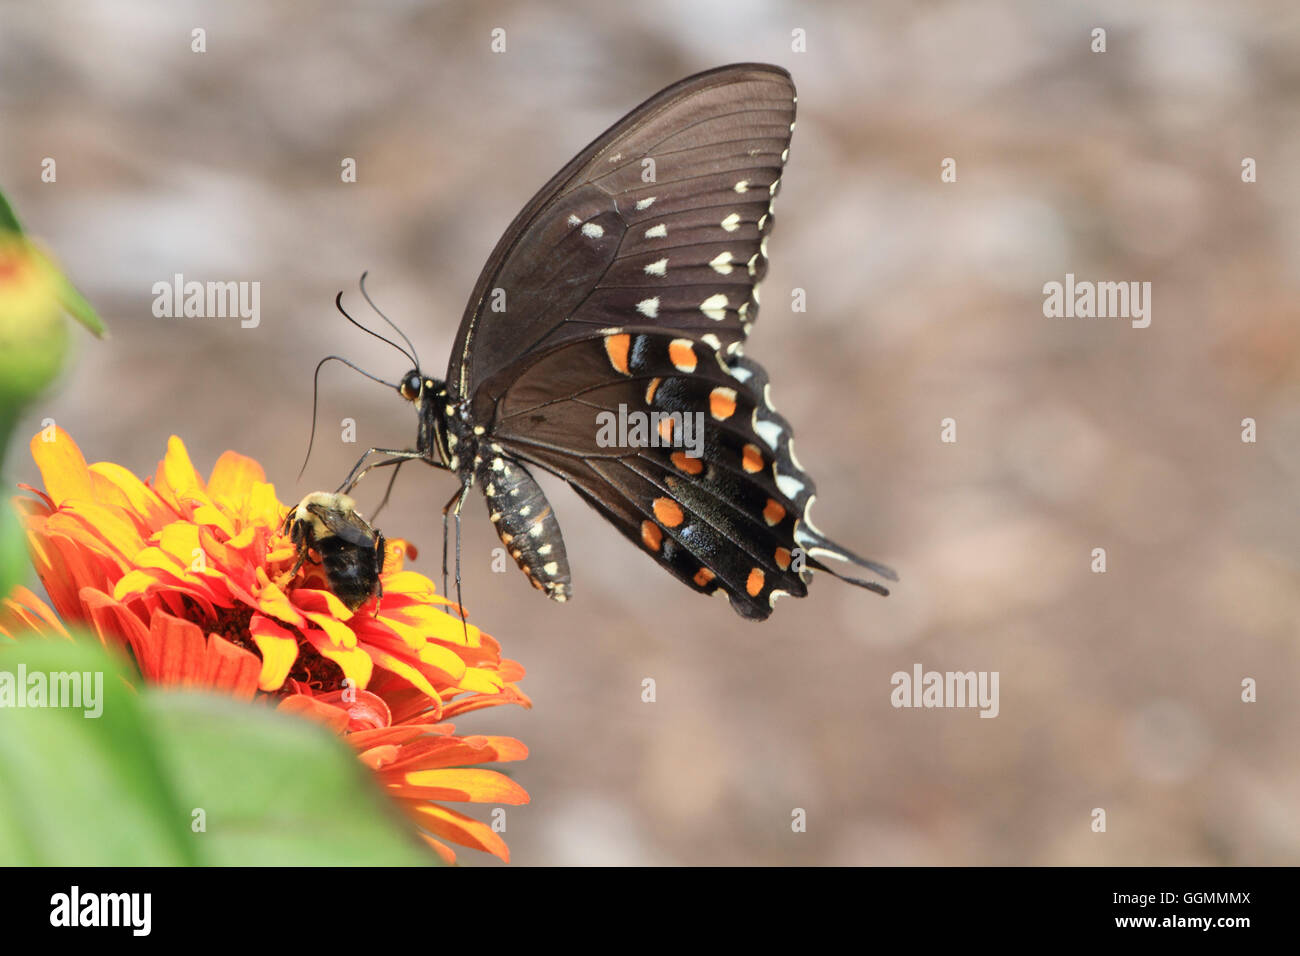 An Eastern Black Swallowtail butterfly, Papilio polyxenes, feeding on a flower at a park in Verona, NJ, USA Stock Photo